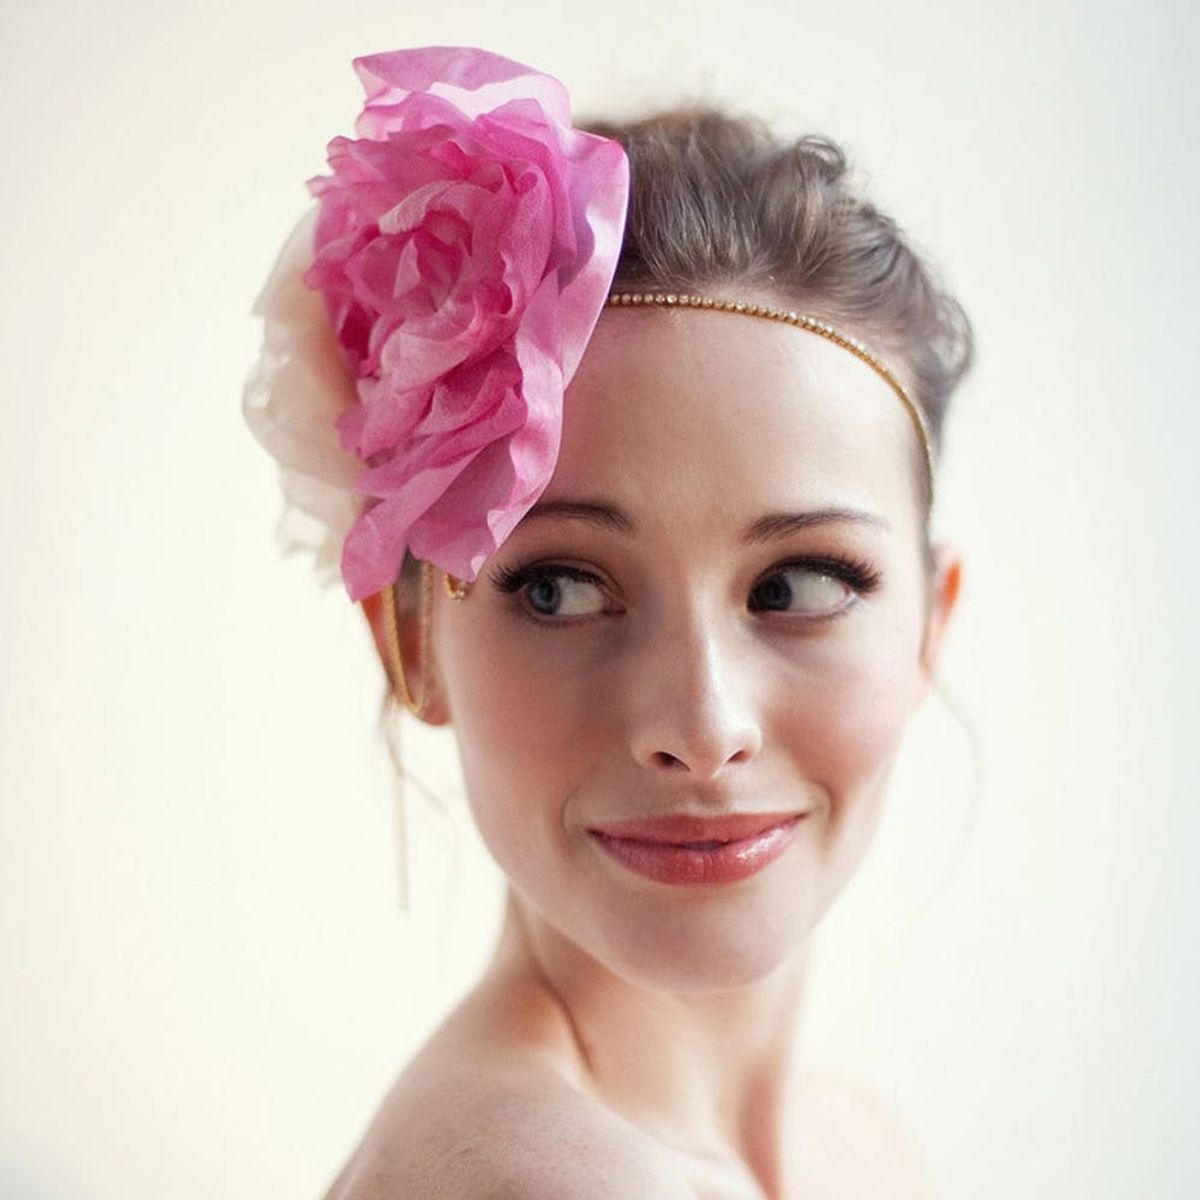 Unveiled: 20 Non-Traditional Veils for the Modern Bride